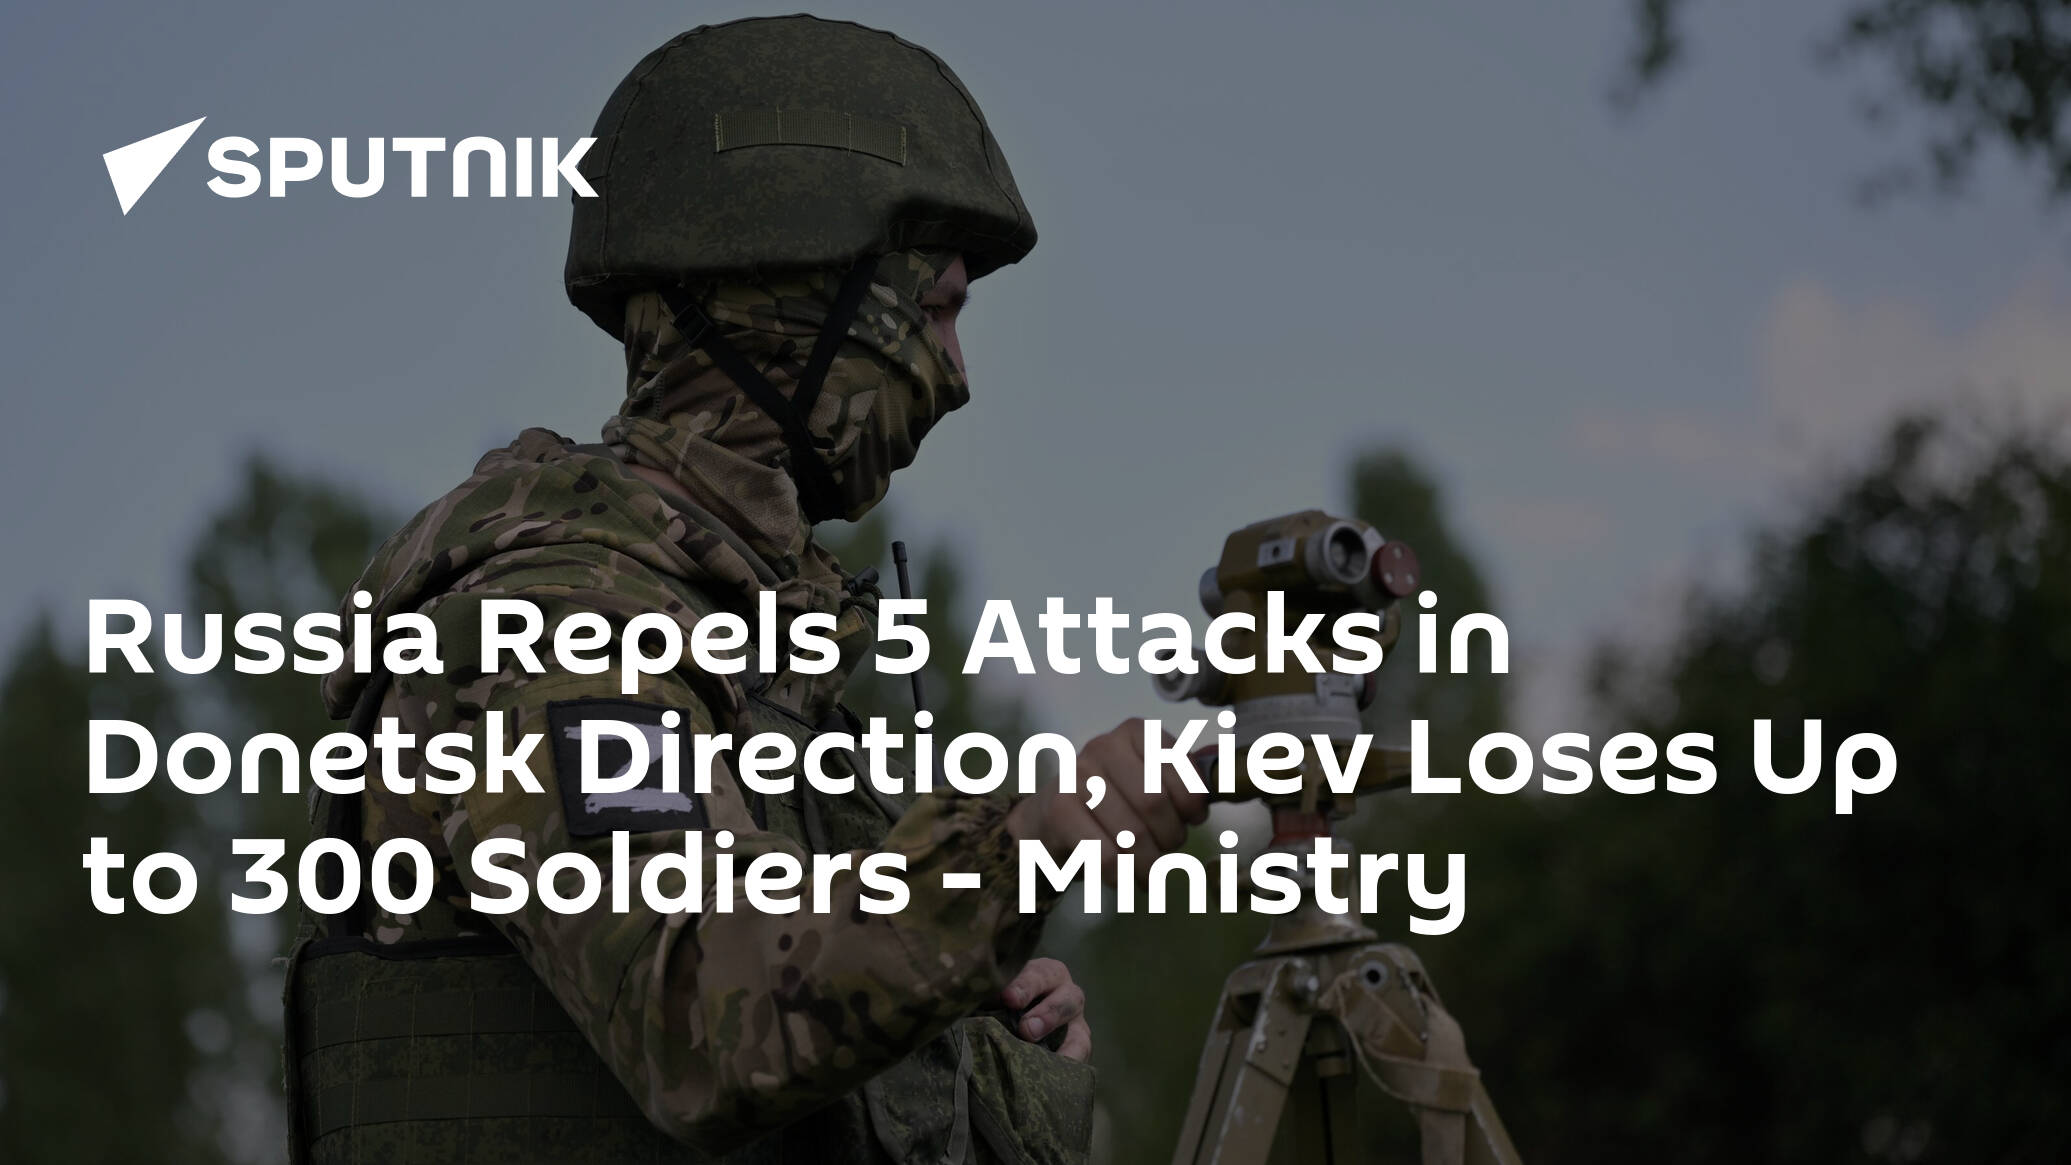 Russia Repels 5 Attacks in Donetsk Direction, Kiev Loses Up to 300 Soldiers – Ministry